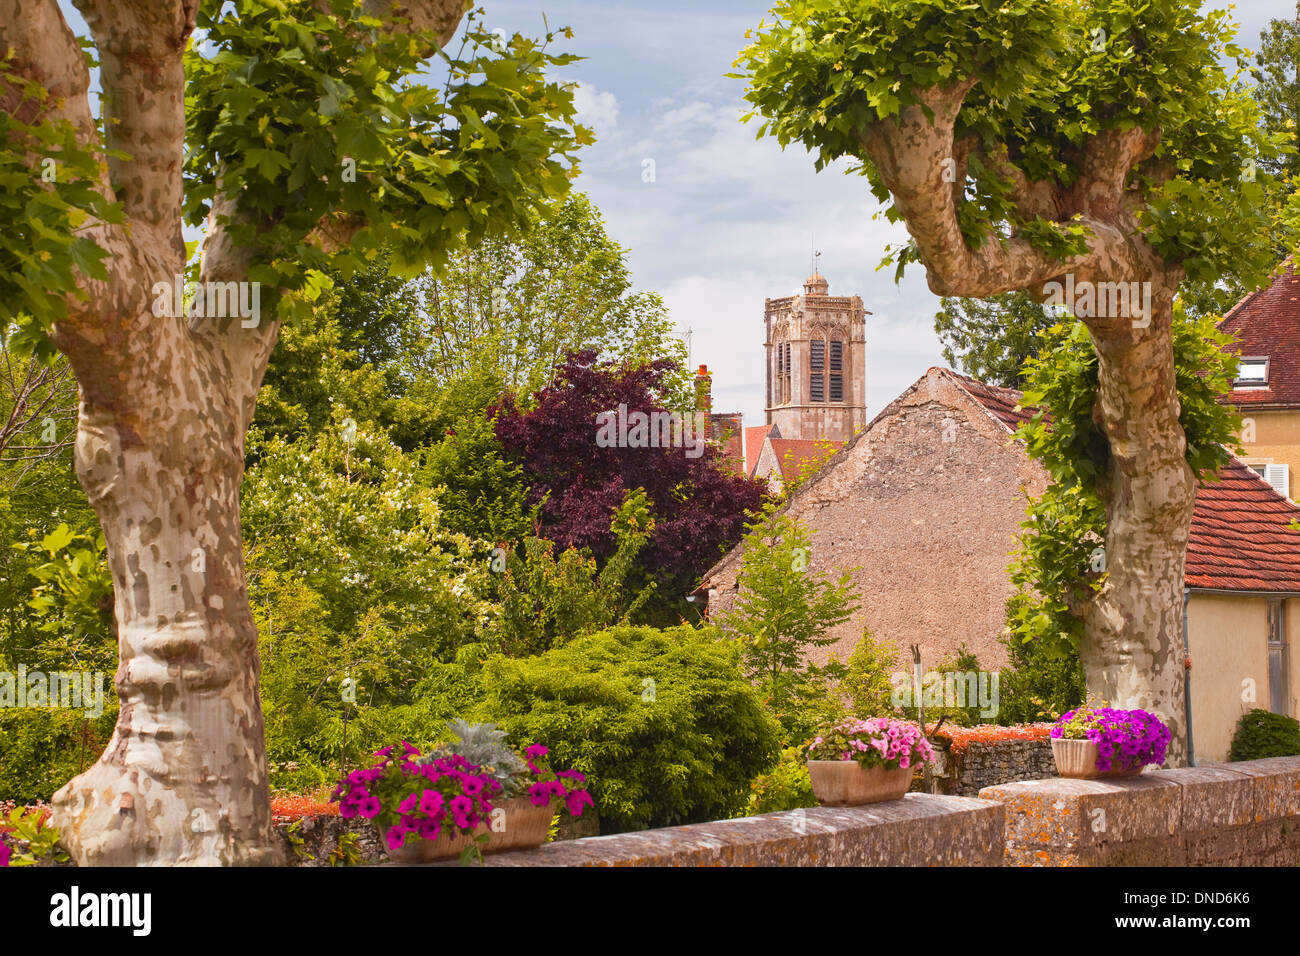 The Eglise Notre Dame in the village of Noyers sur Serein in Burgundy. Stock Photo